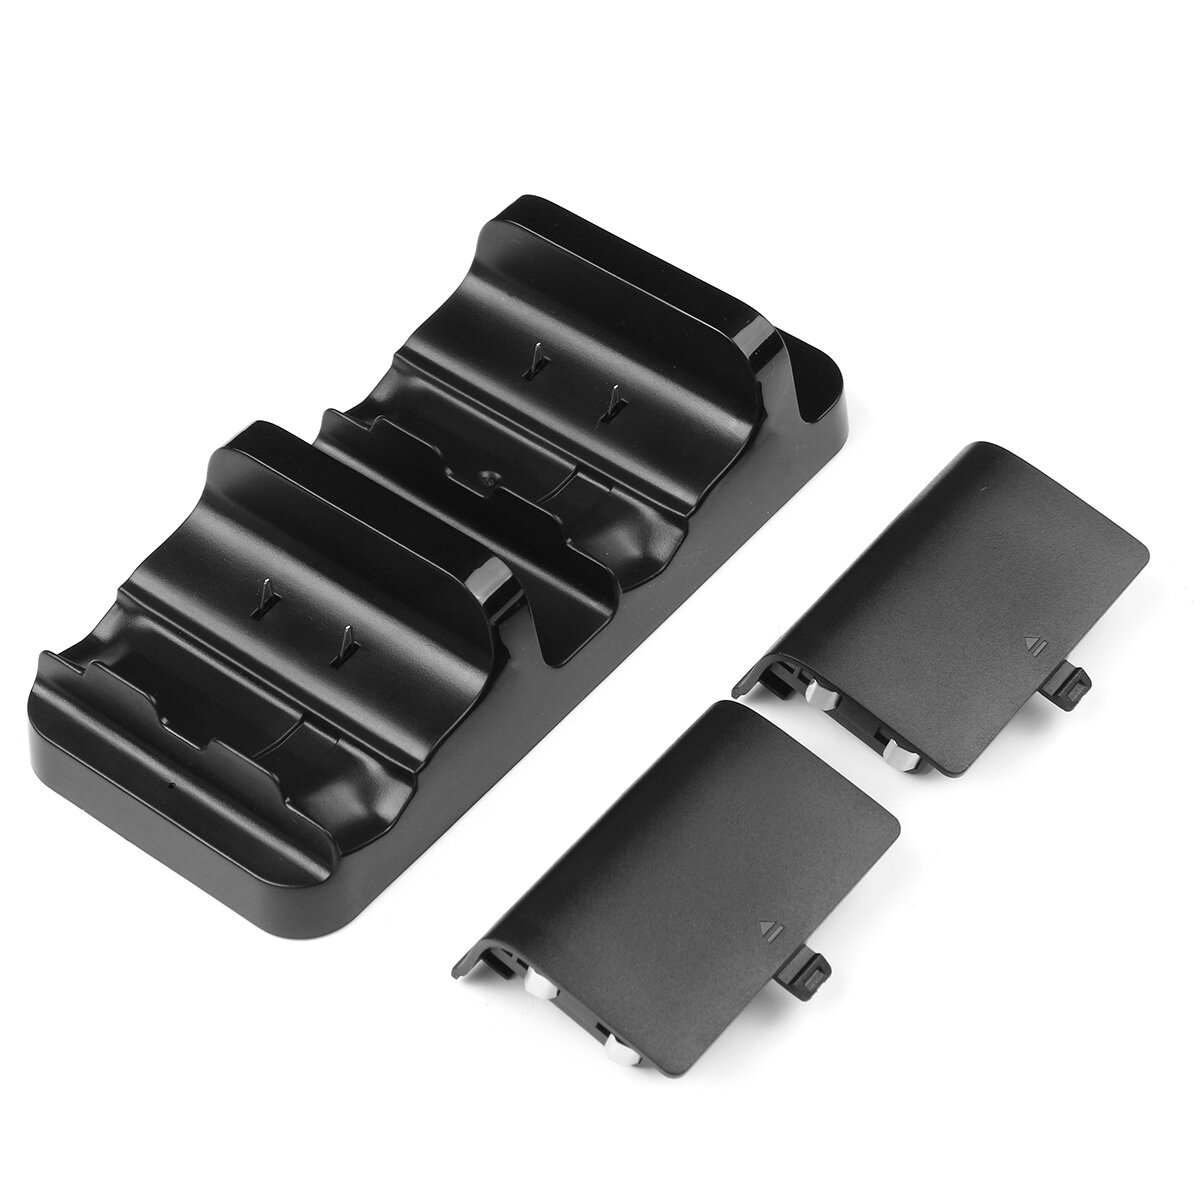 

Portable Charging Dock Station for Xbox One Controllers with 2 Lithium-ion Rechargeable Battery Packs